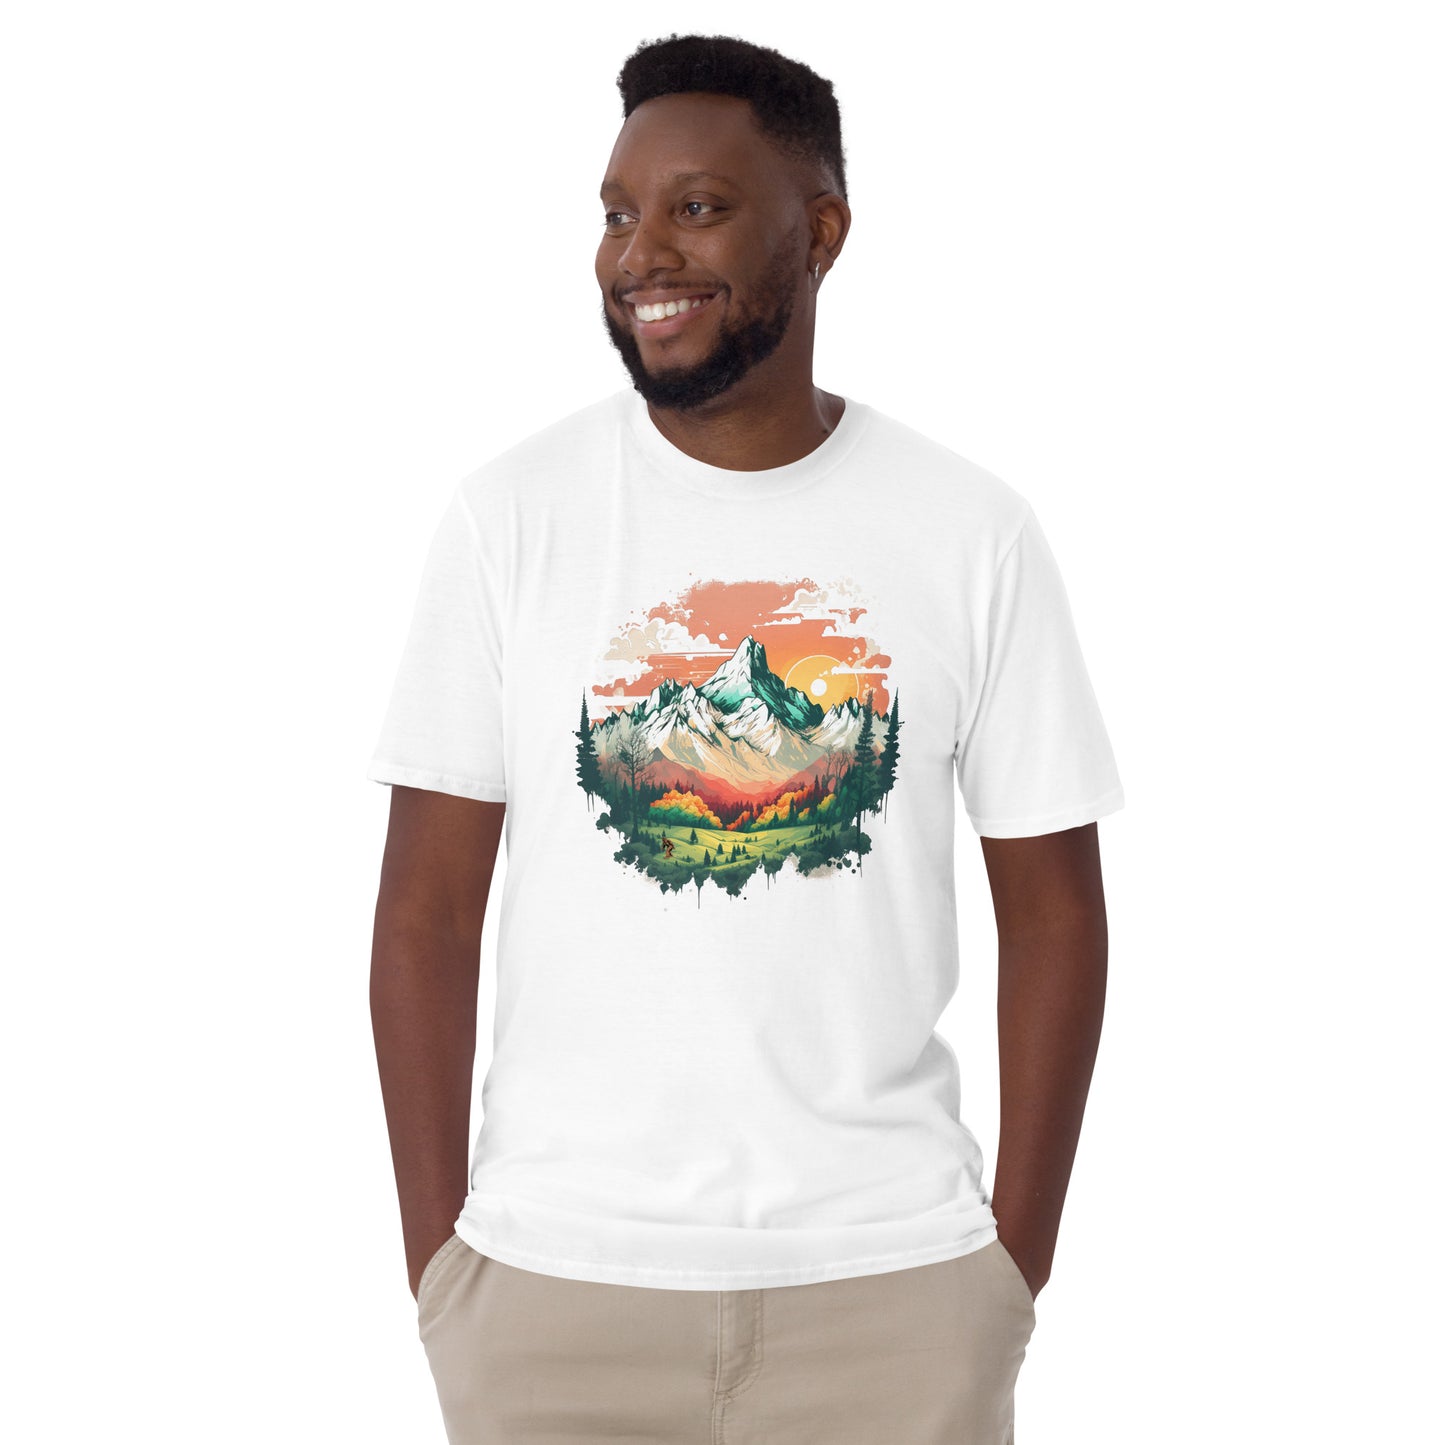 The Great Outdoors Short-Sleeve Unisex T-Shirt